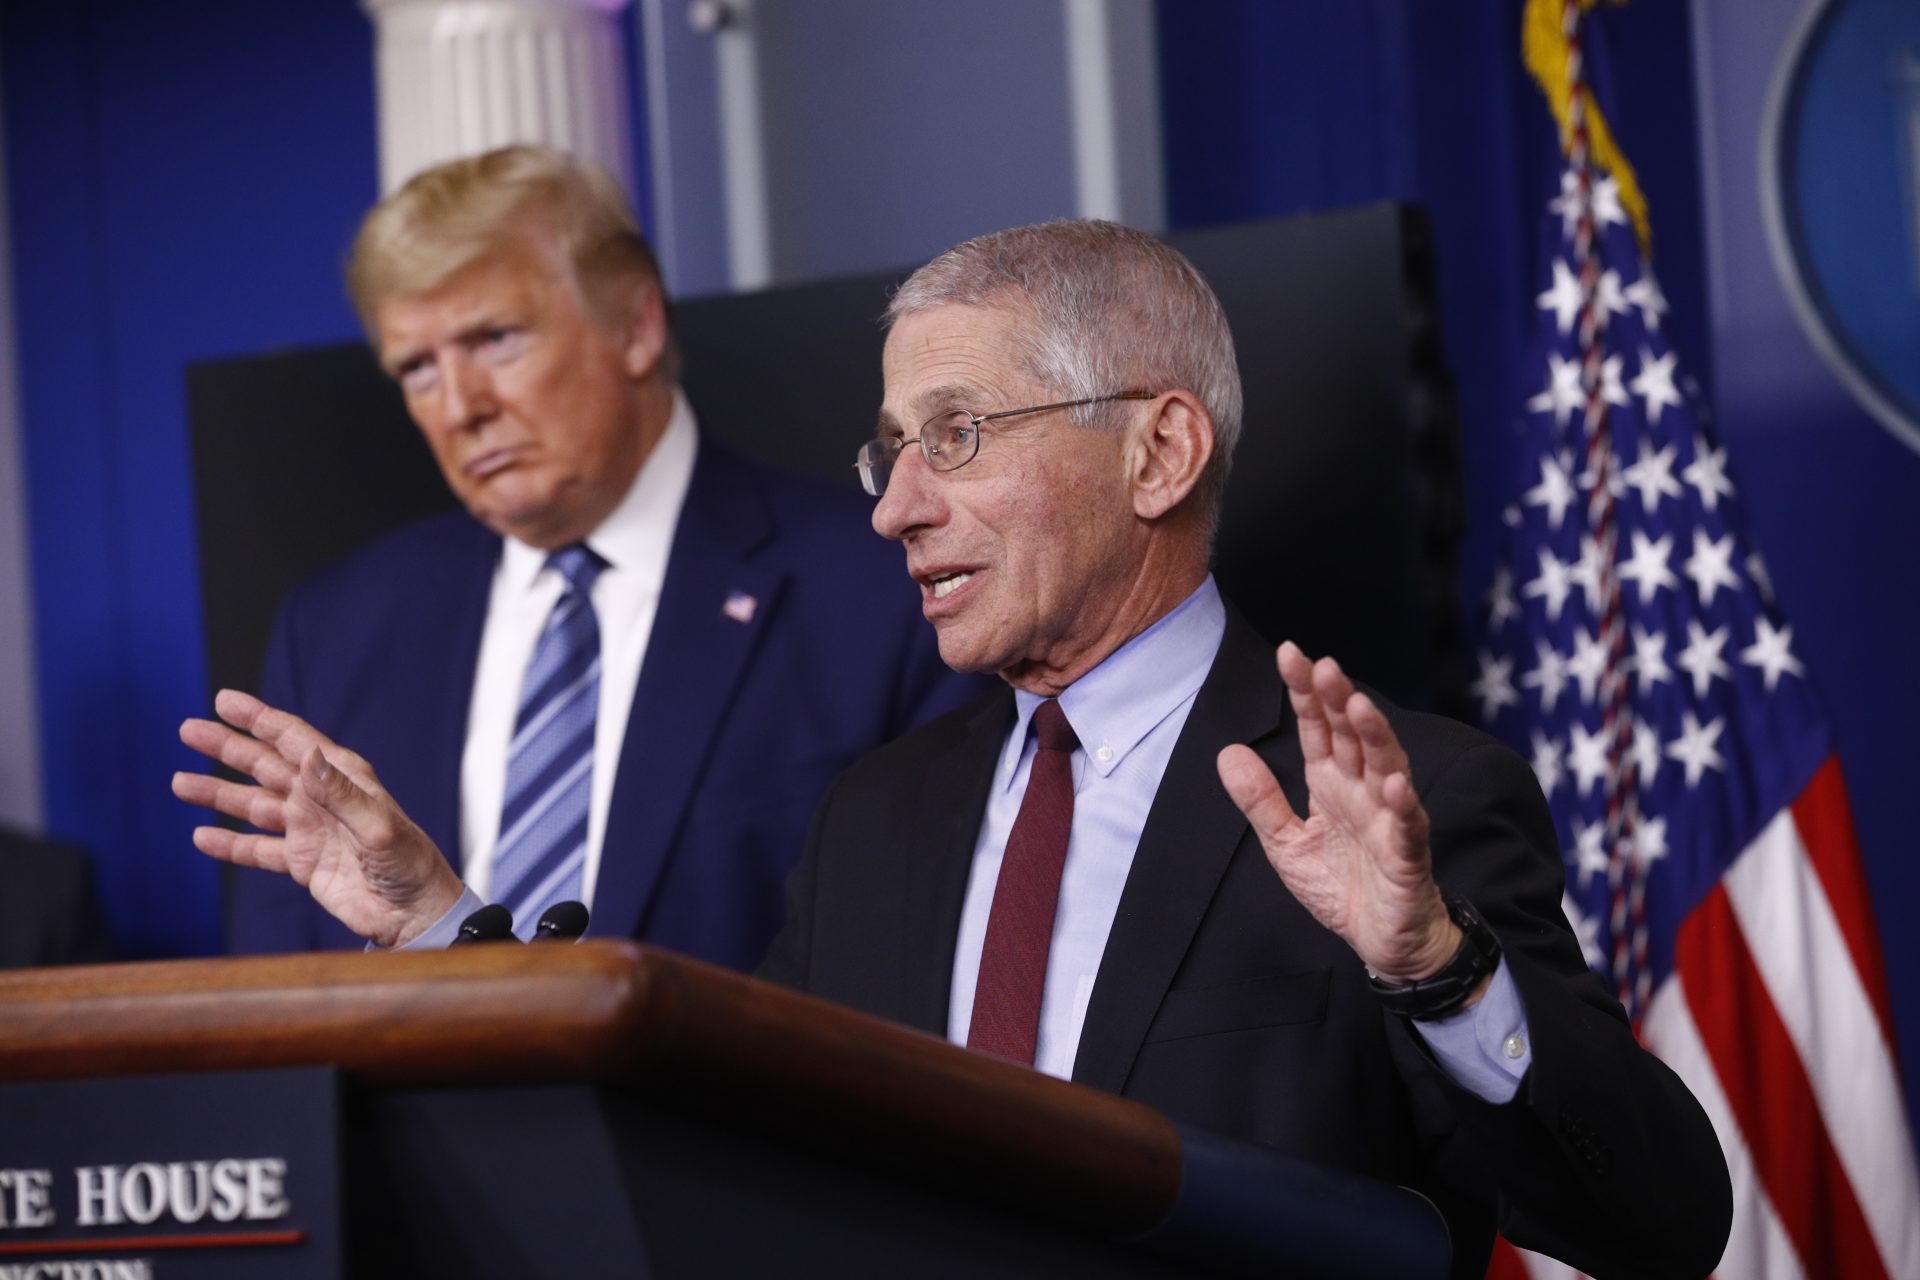 President Donald Trump listens as Director of the National Institute of Allergy and Infectious Diseases Dr. Anthony Fauci speaks during a coronavirus task force briefing at the White House, Sunday, April 5, 2020, in Washington.